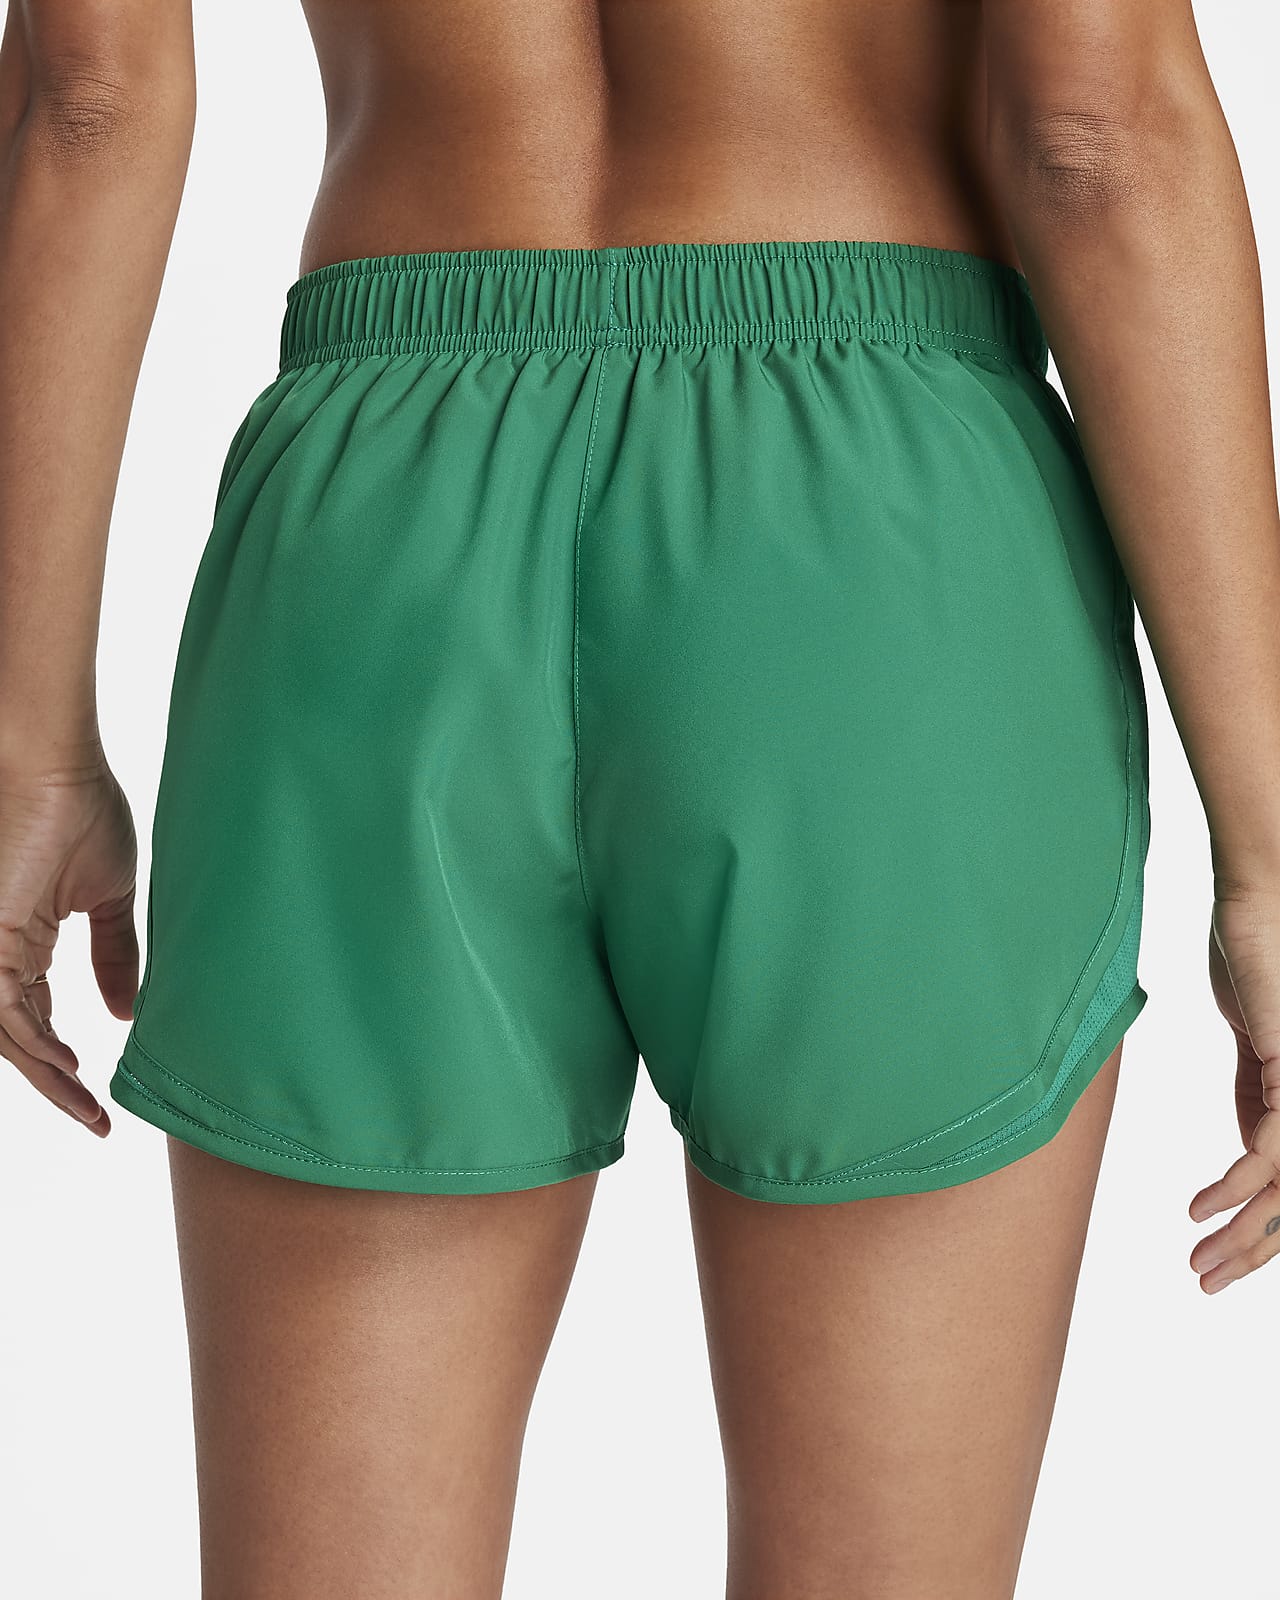 https://static.nike.com/a/images/t_PDP_1280_v1/f_auto,q_auto:eco/528c96c6-559a-41bf-92fe-72d33ba9bb0f/shorts-de-running-con-ropa-interior-forrada-tempo-FRBq5w.png